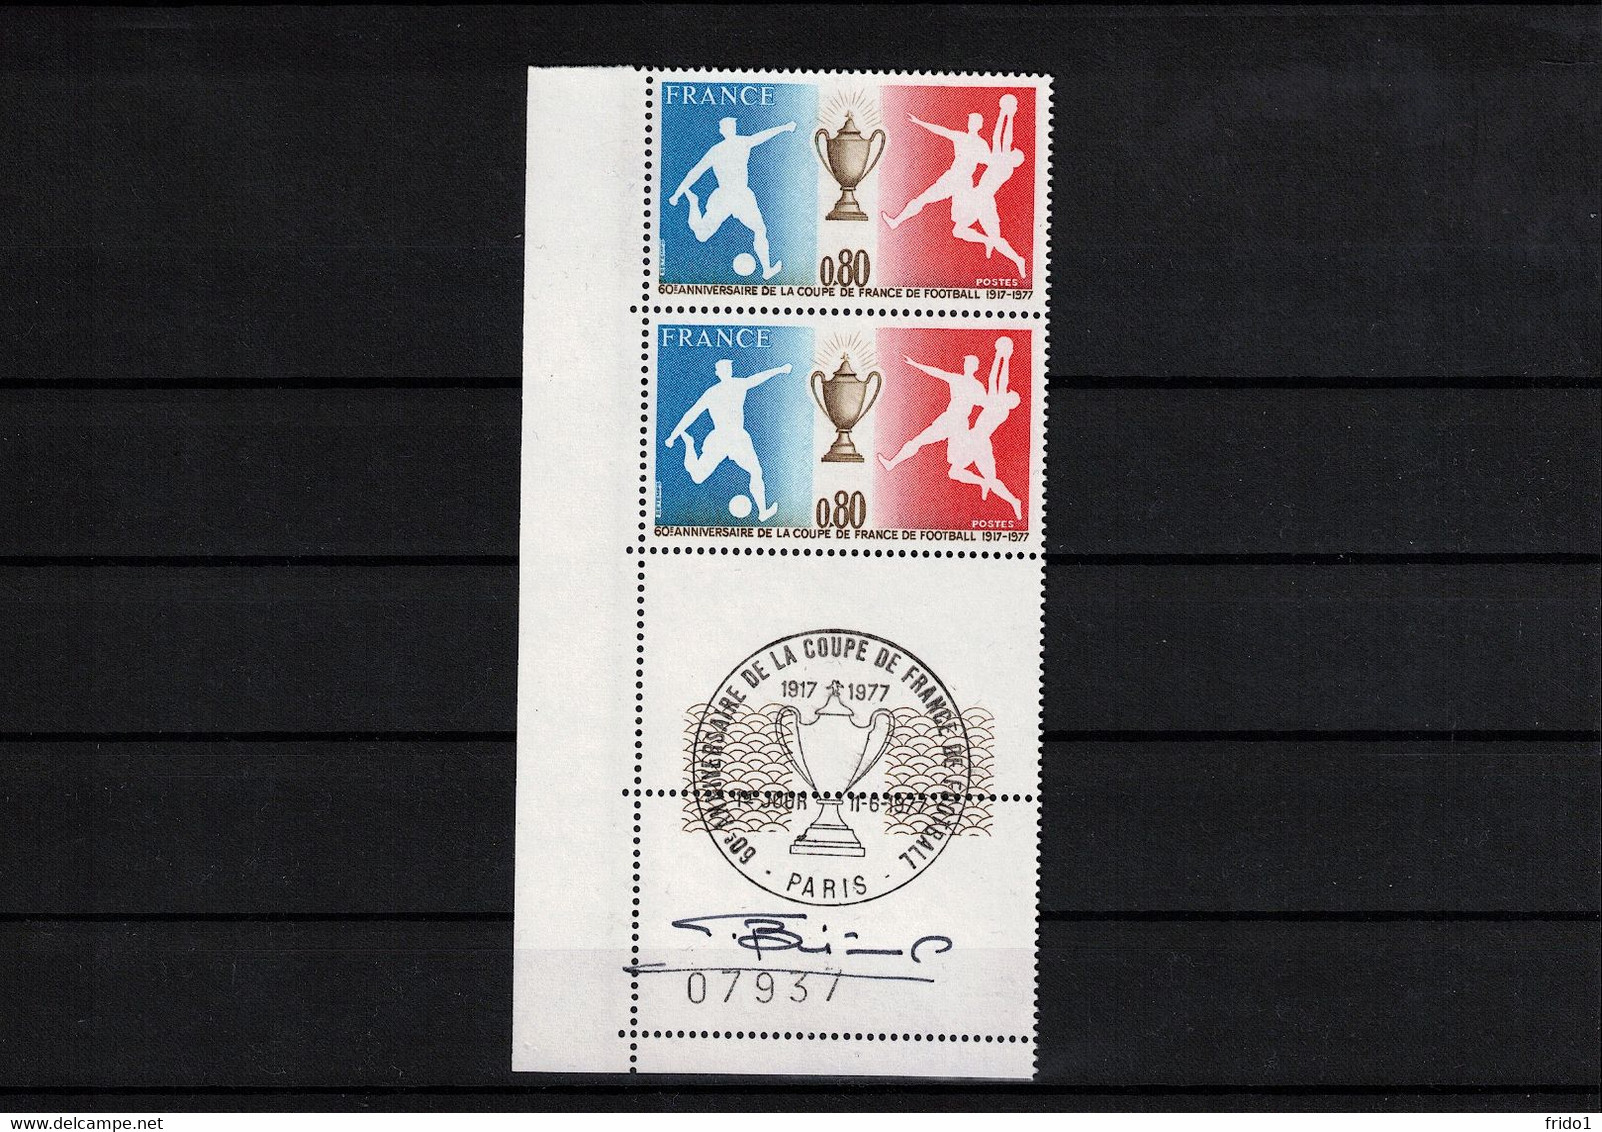 France 1977 60th Anniversary Of The French Cup Signed Pair Postfrisch / MNH - 2010 – South Africa